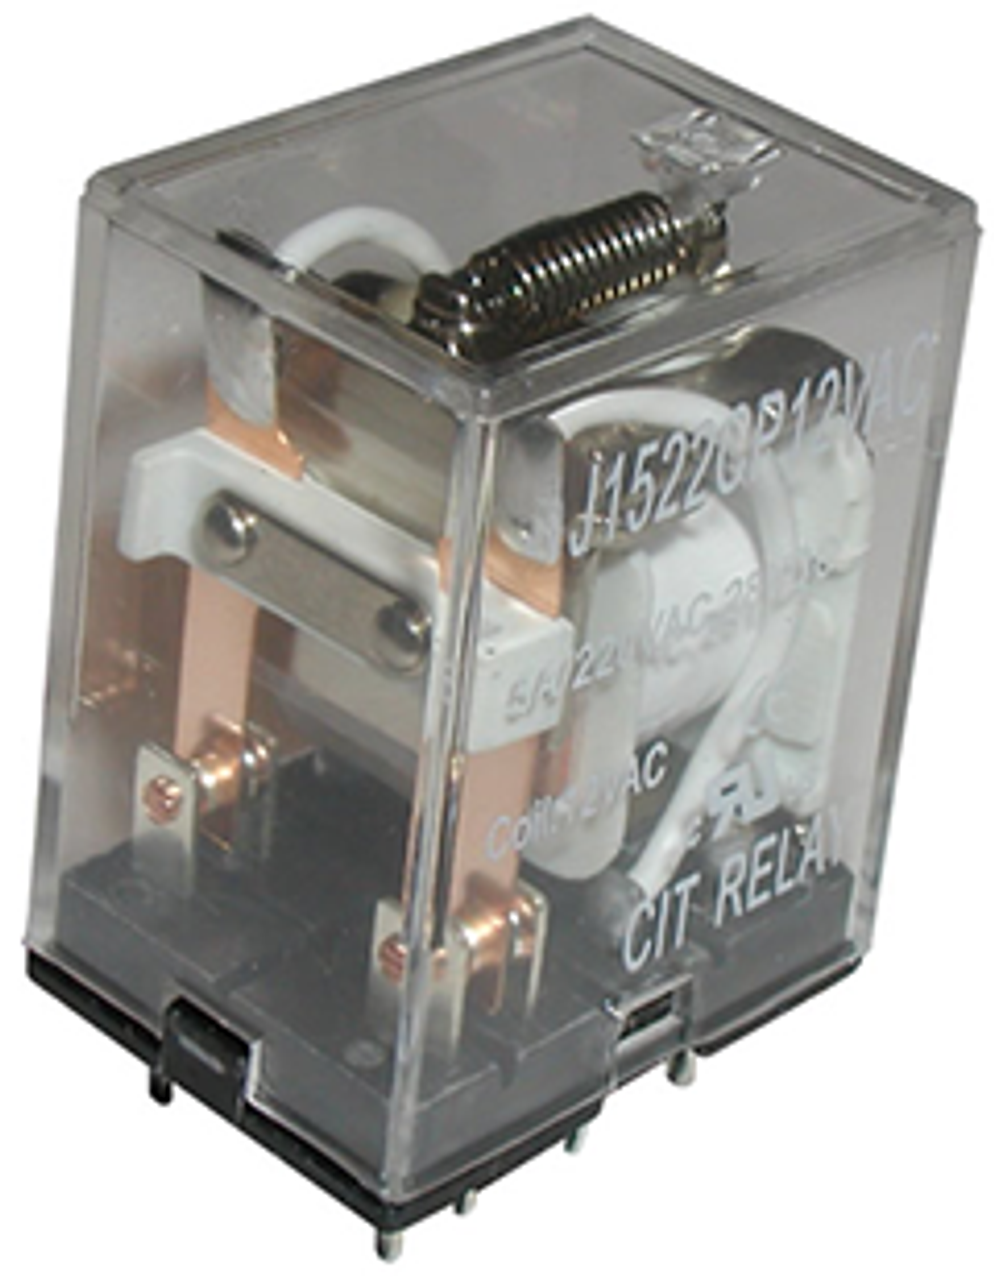 CIT Relay and Switch J1524CT110VACT Industrial Relays